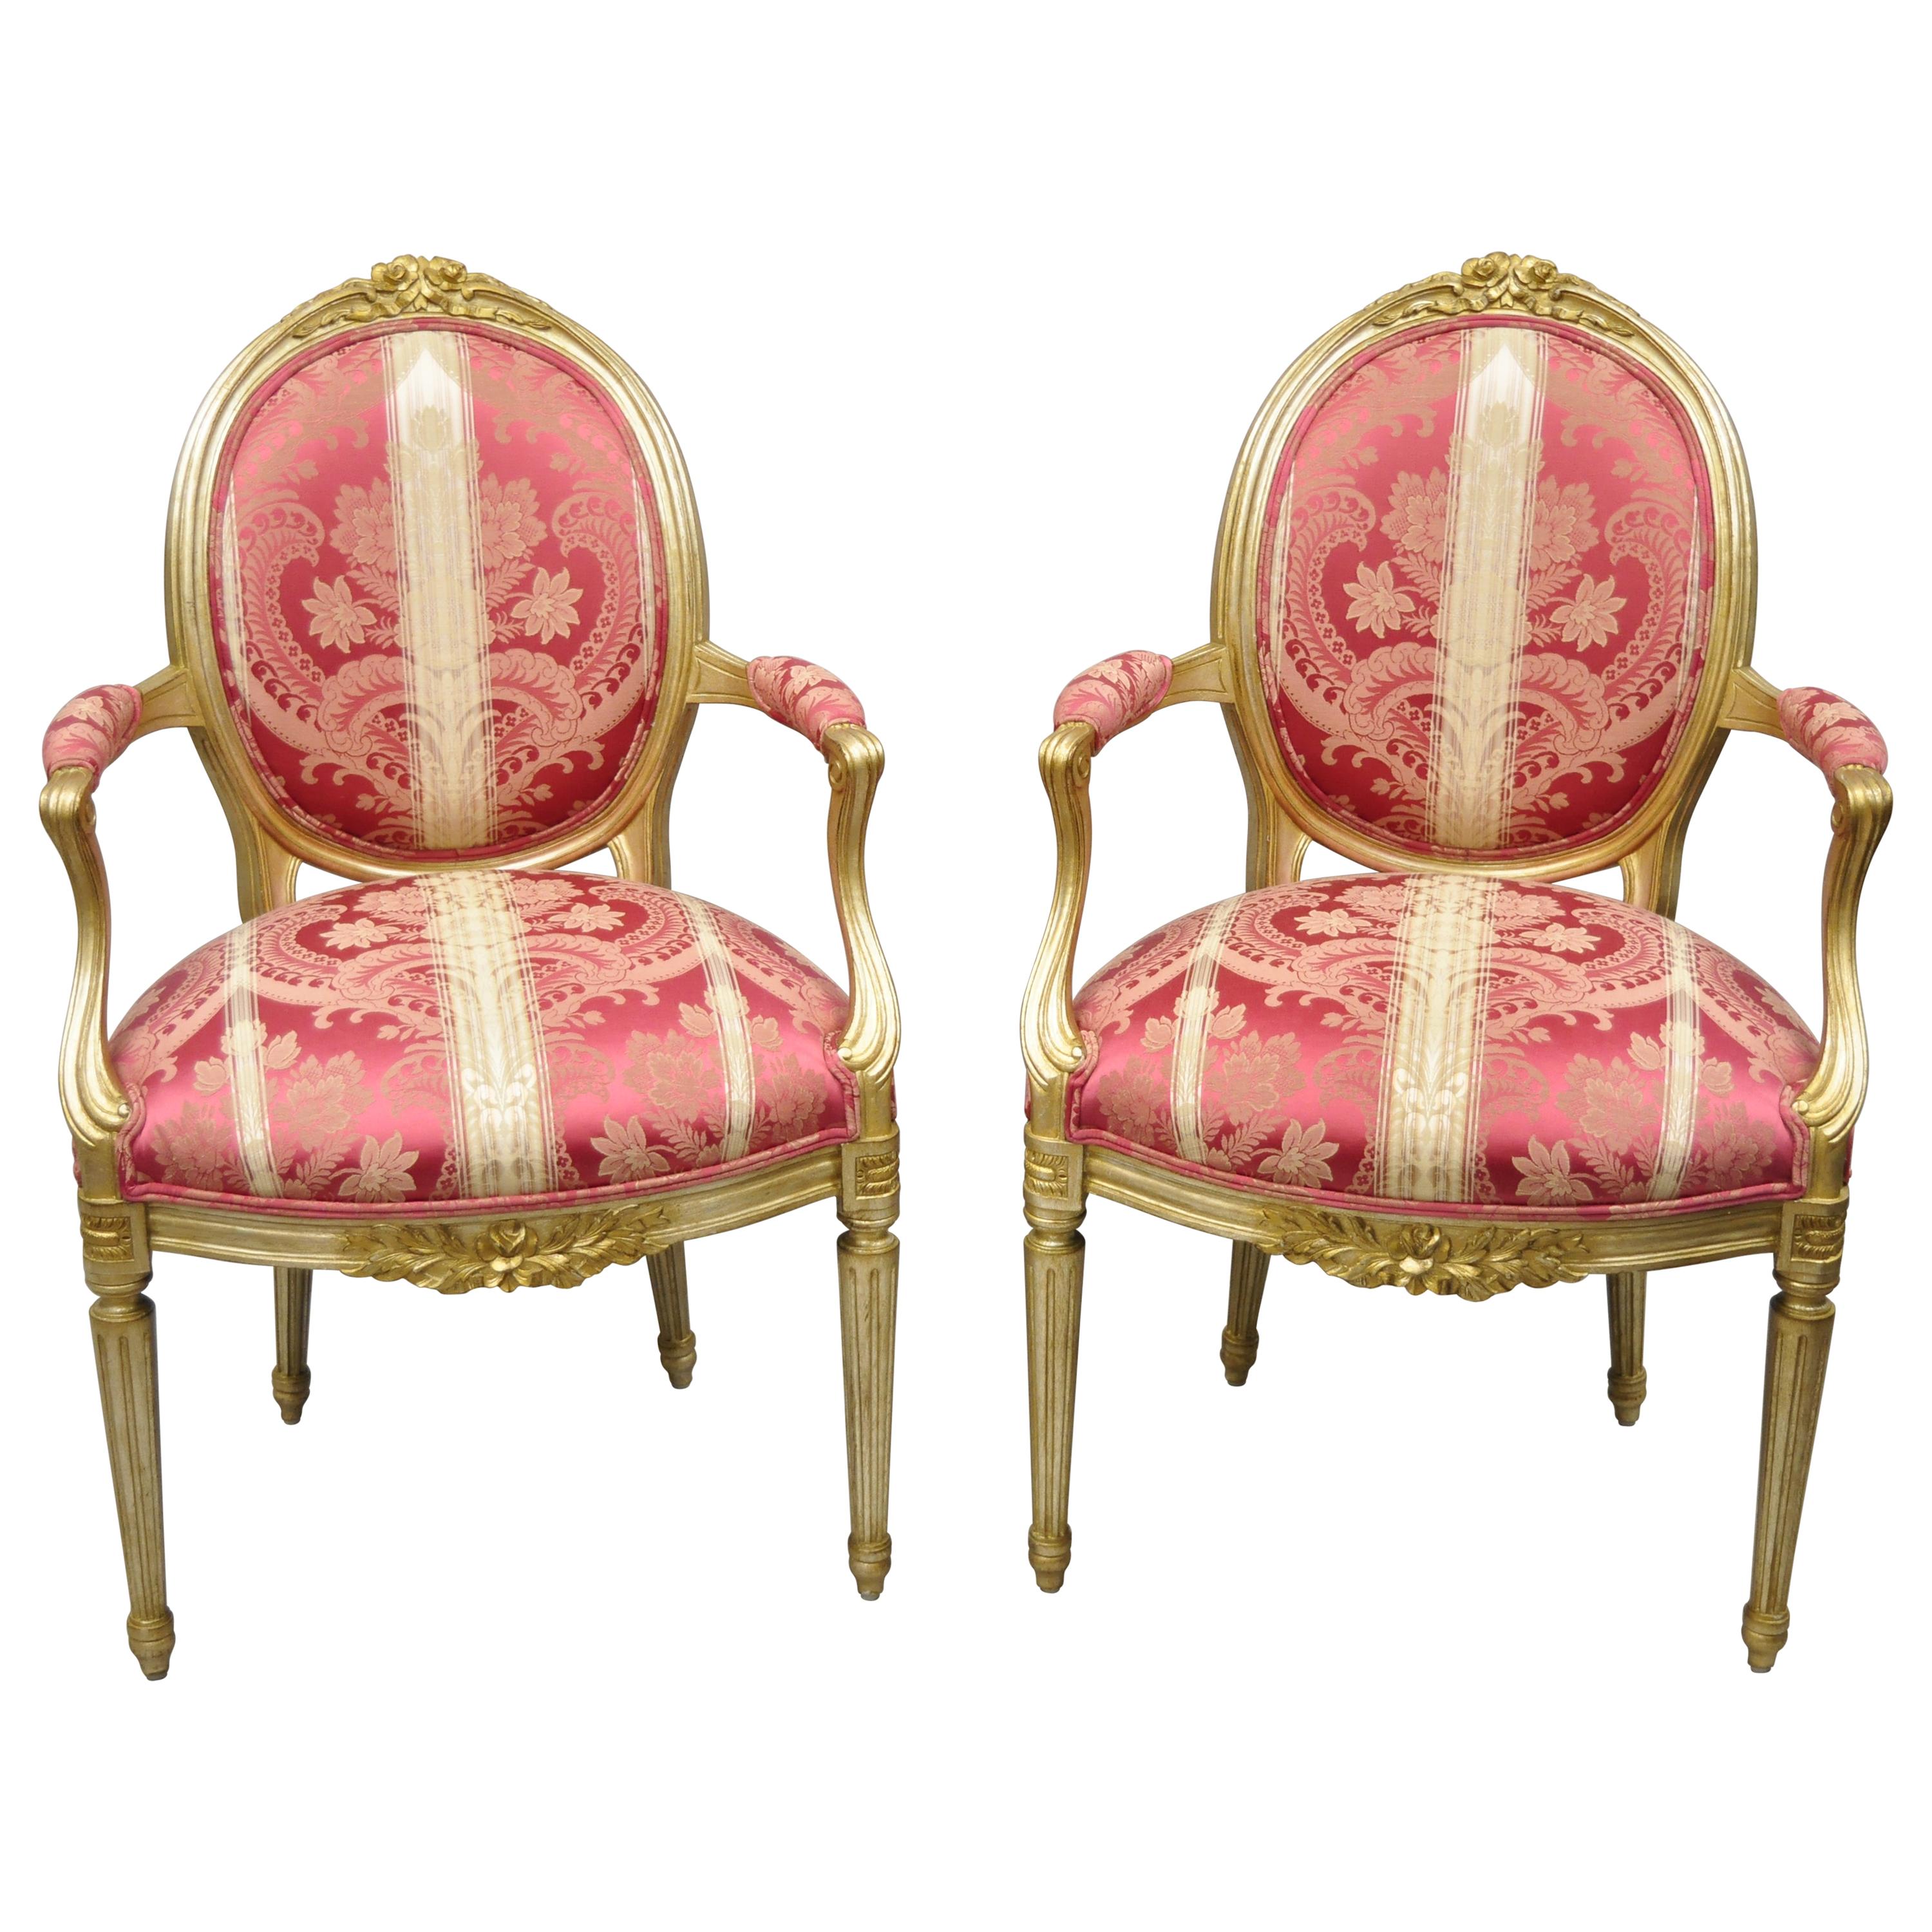 French Louis XVI Style Silver Gold Gilt Pink Damask Oval Back Arm Chairs, Pair For Sale